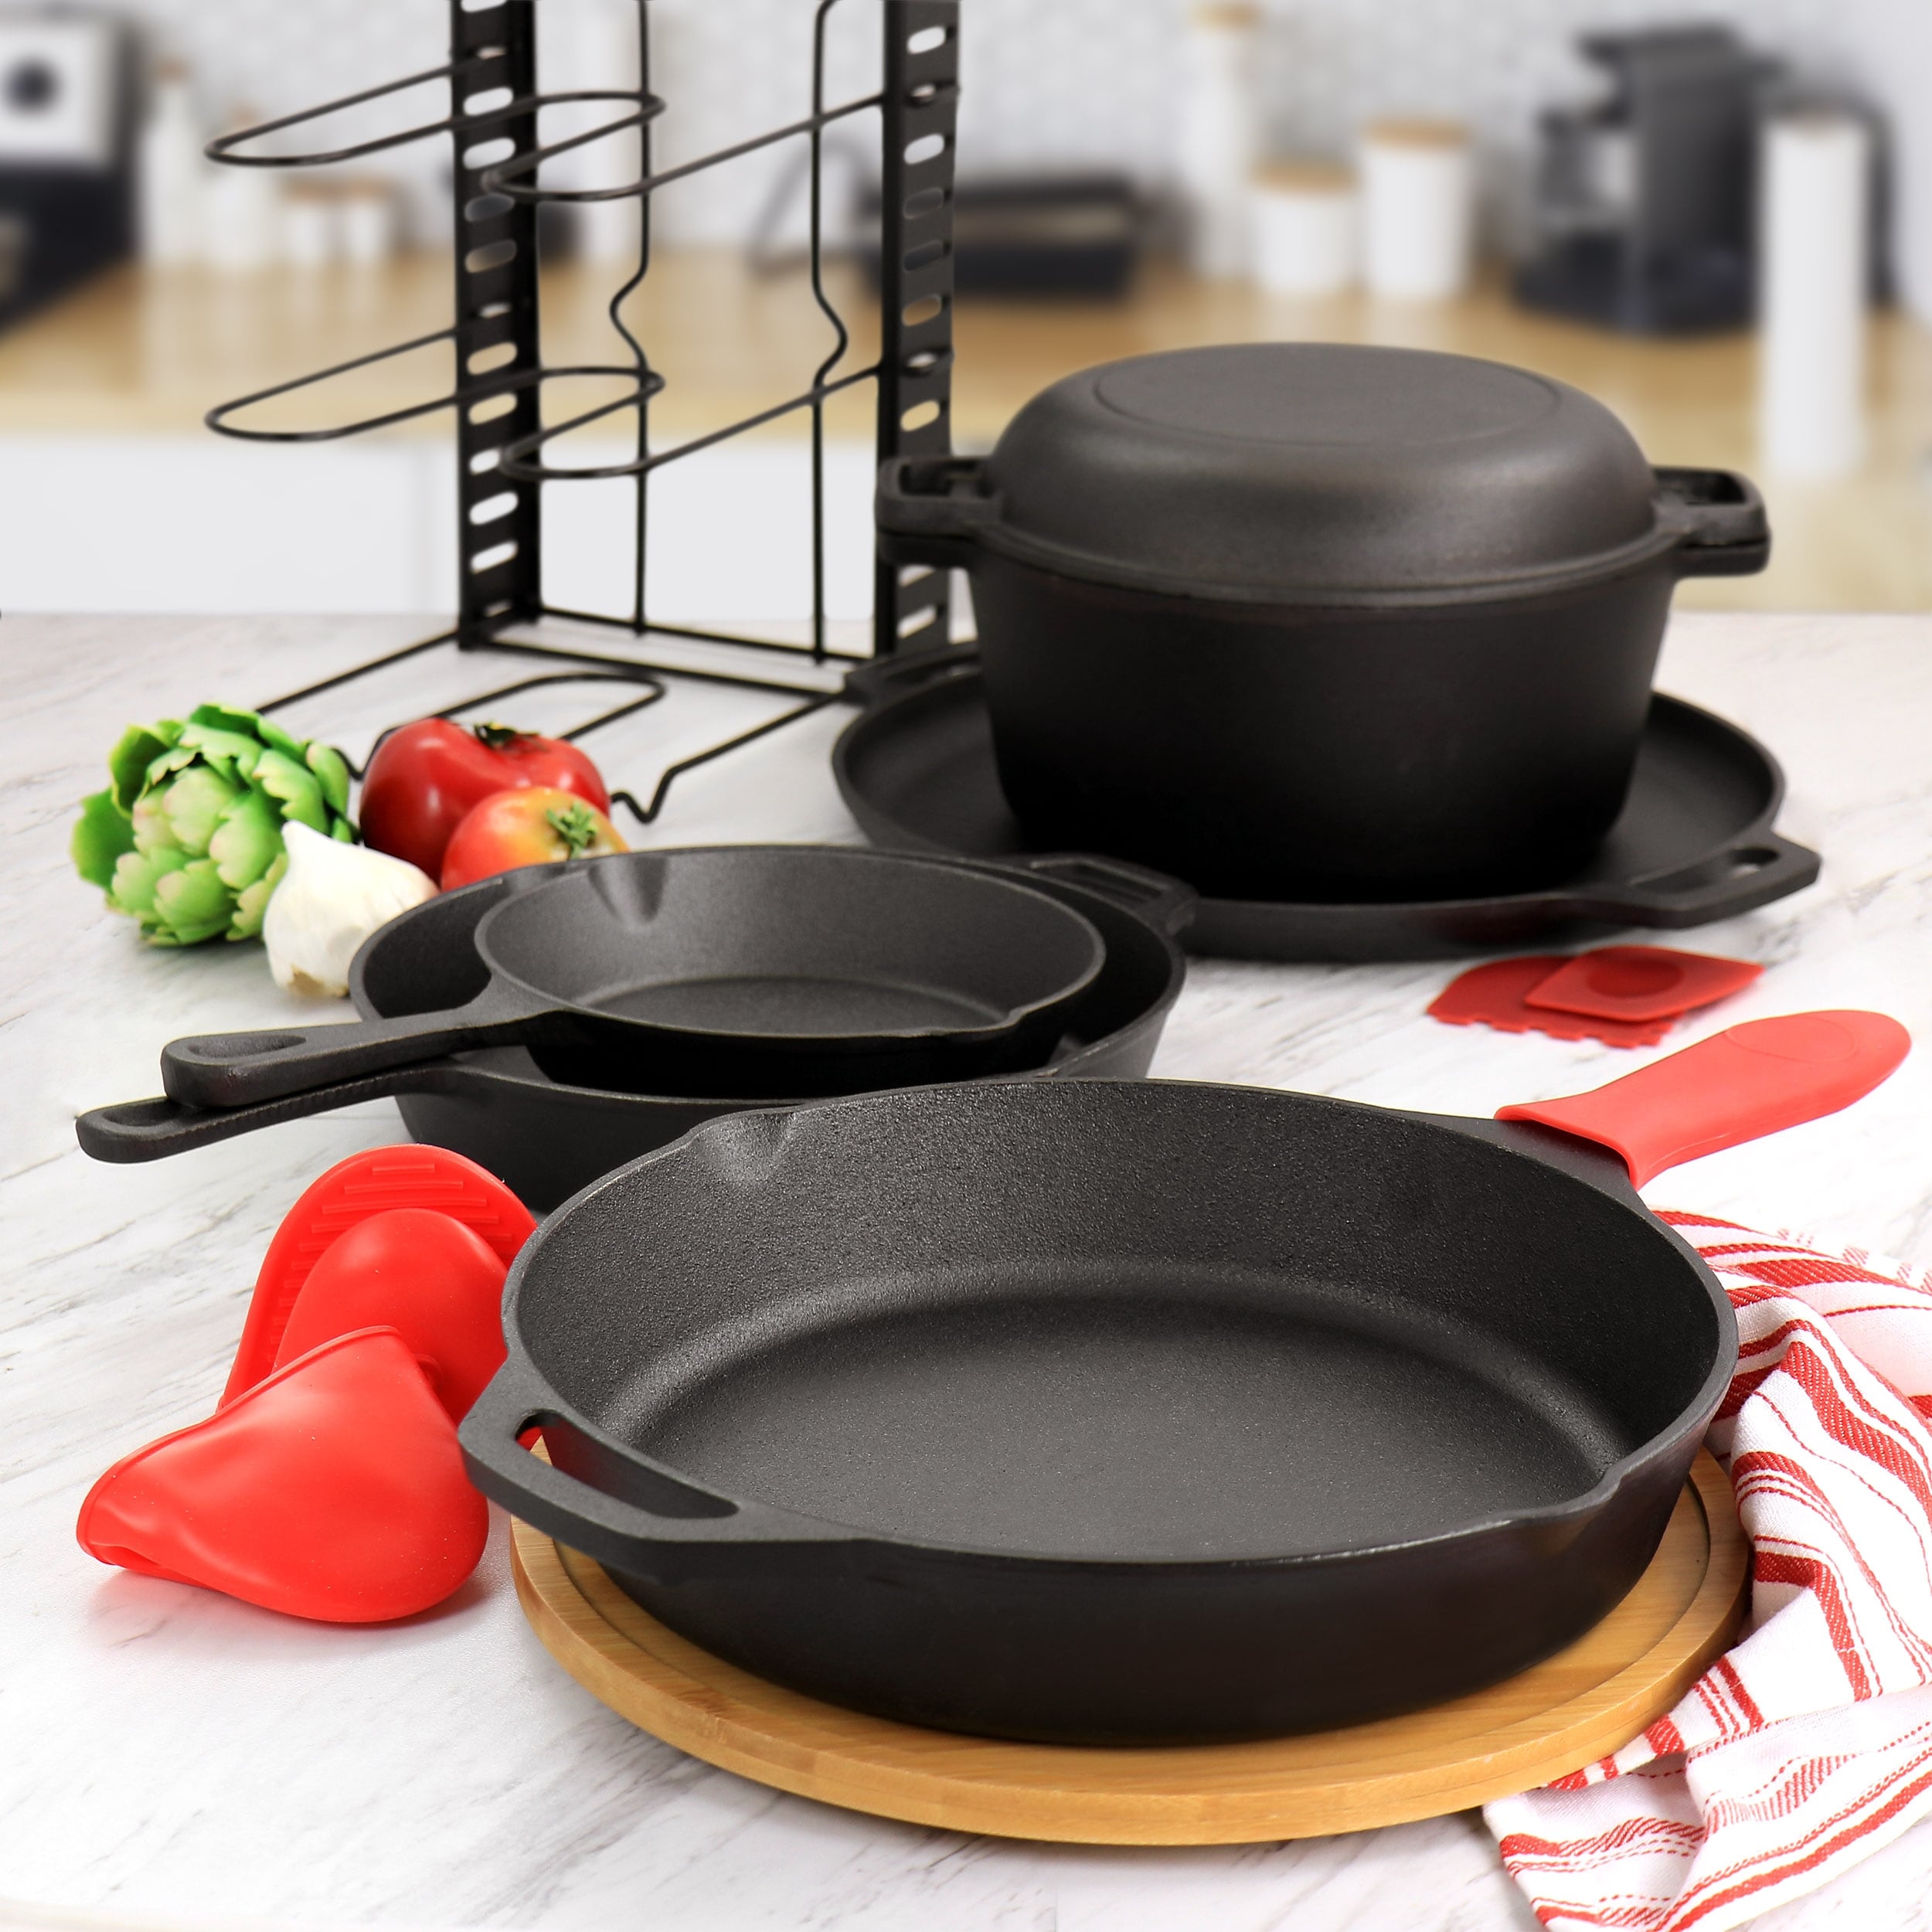 https://ak1.ostkcdn.com/images/products/is/images/direct/c00bcf7406629ea974bd523788b1821fdd1cf8ca/Cast-Iron-Pre-Seasoned-Skillet-and-Accessories-12-Piece-Set.jpg